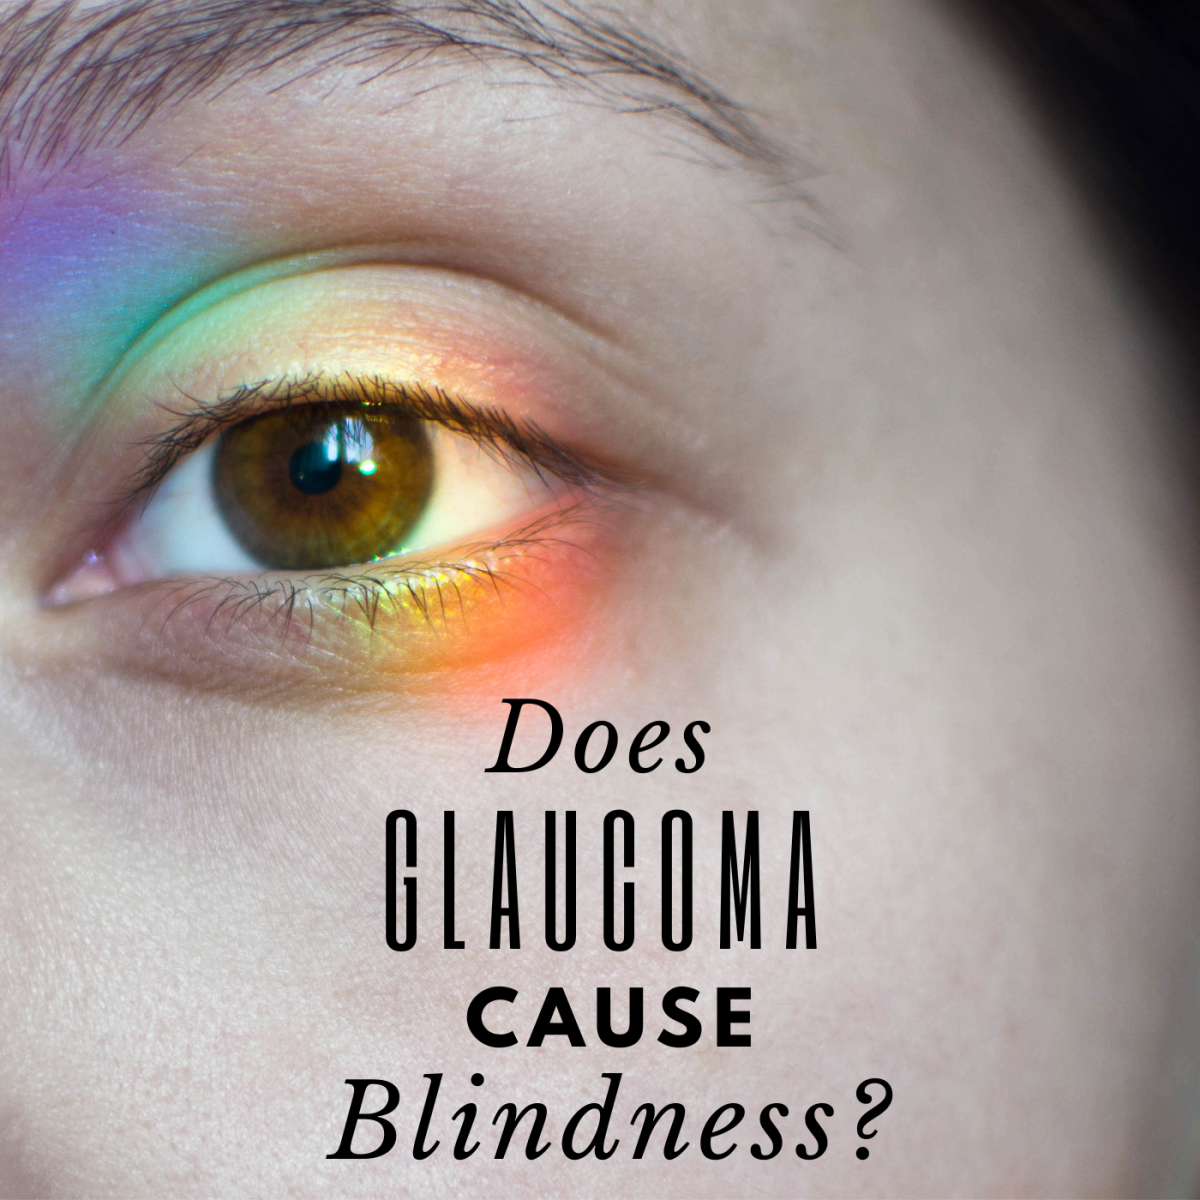 Does glaucoma cause blindness?